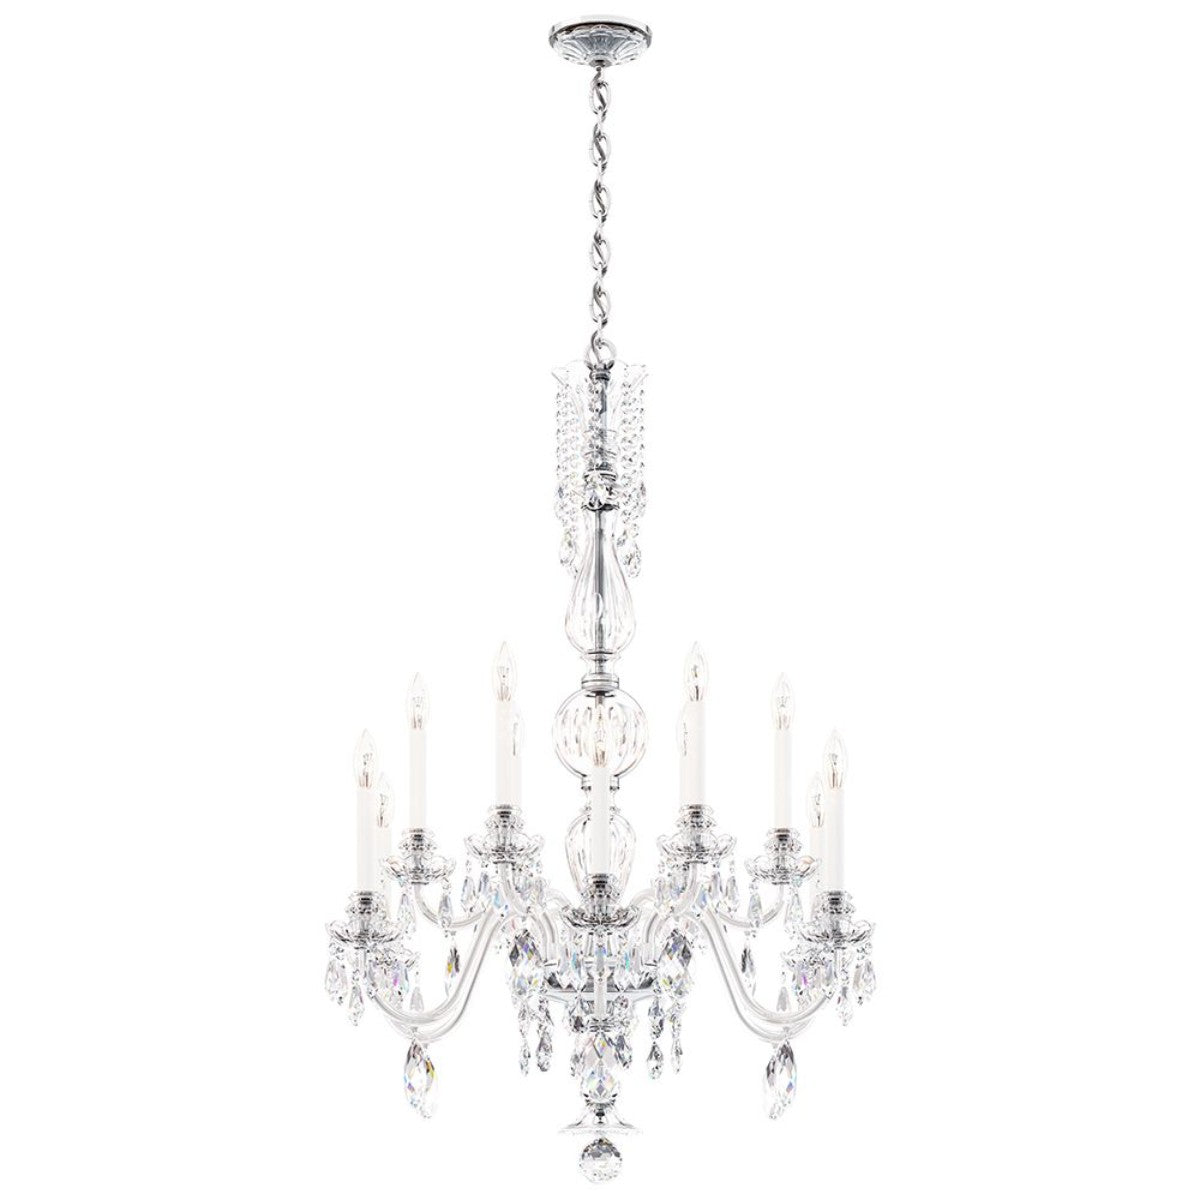 Hamilton Nouveau 12 Light Silver Chandelier with Clear Heritage Crystals